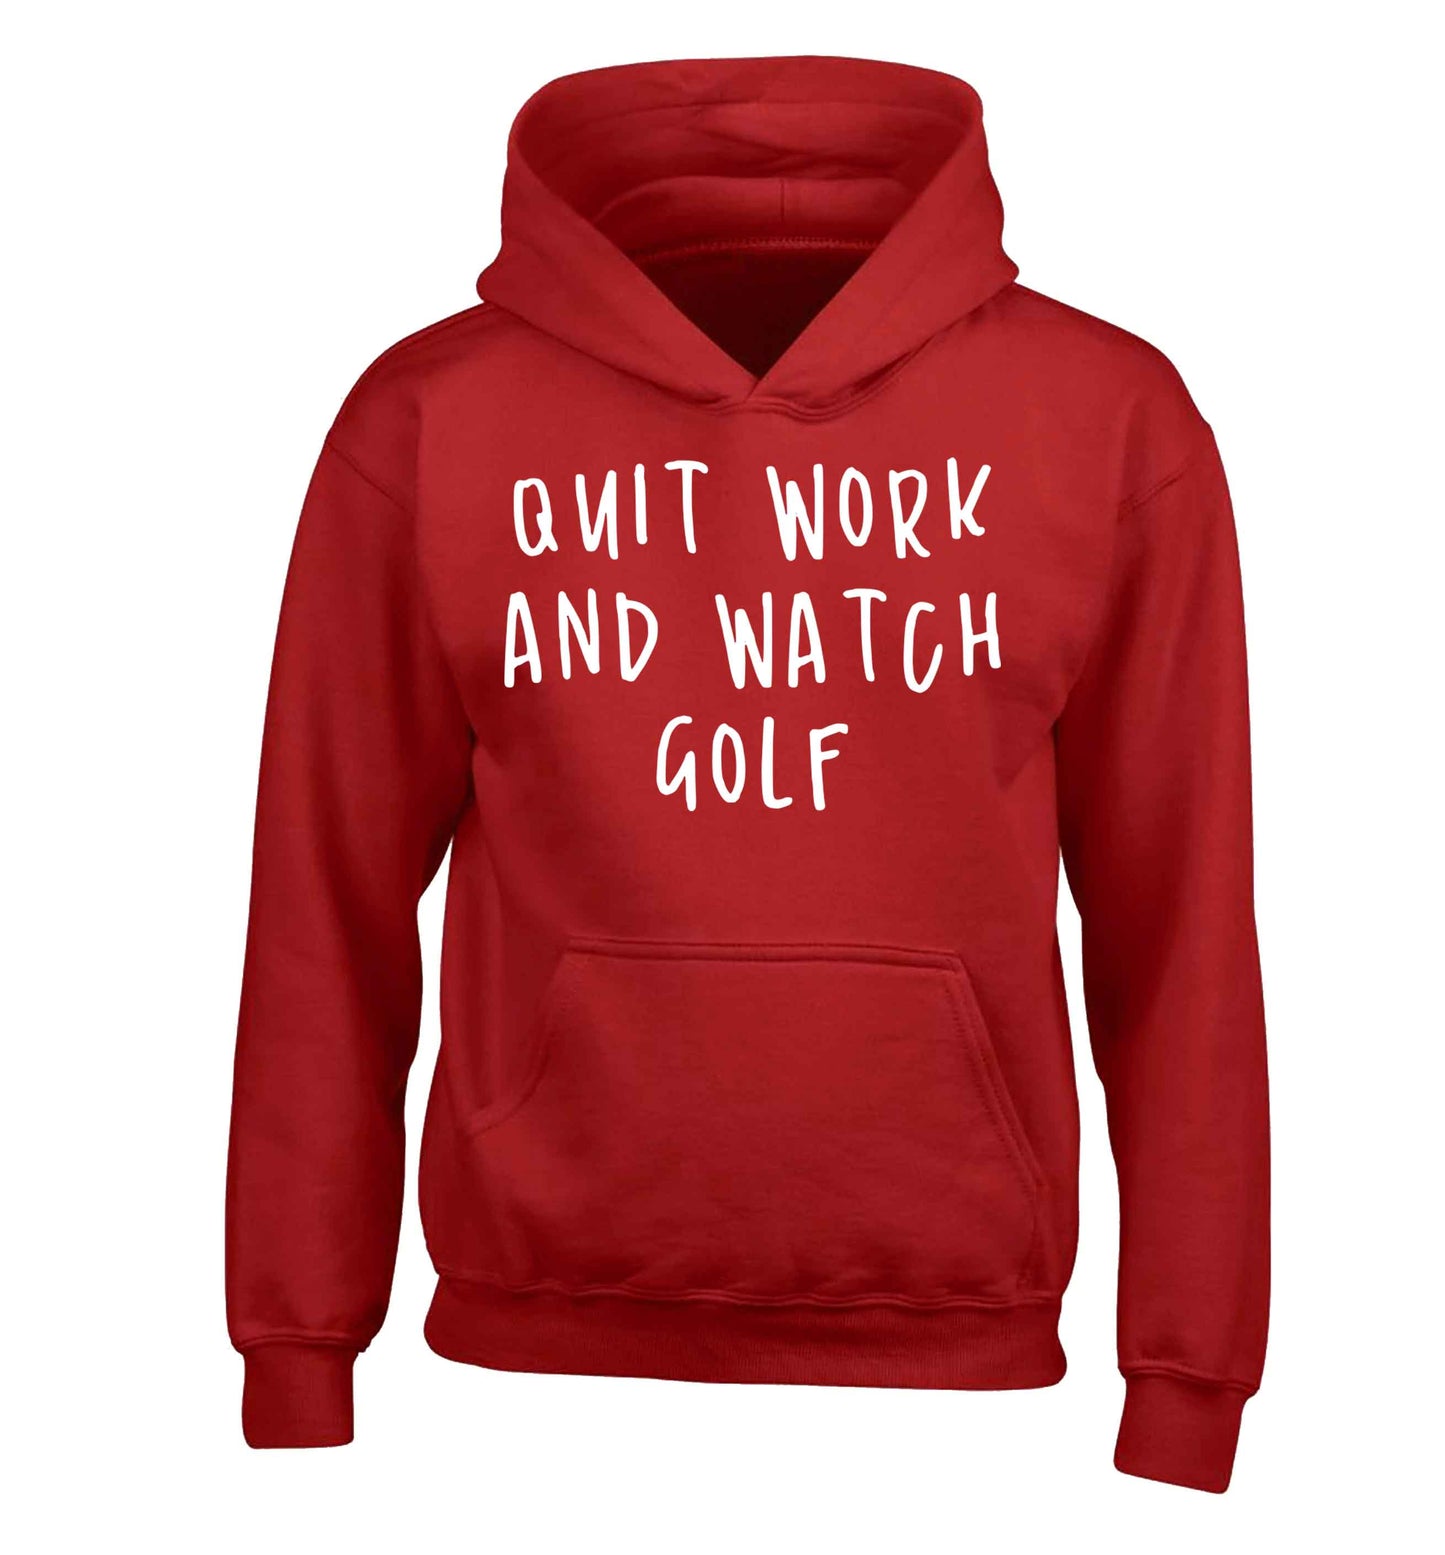 Quit work and watch golf children's red hoodie 12-13 Years